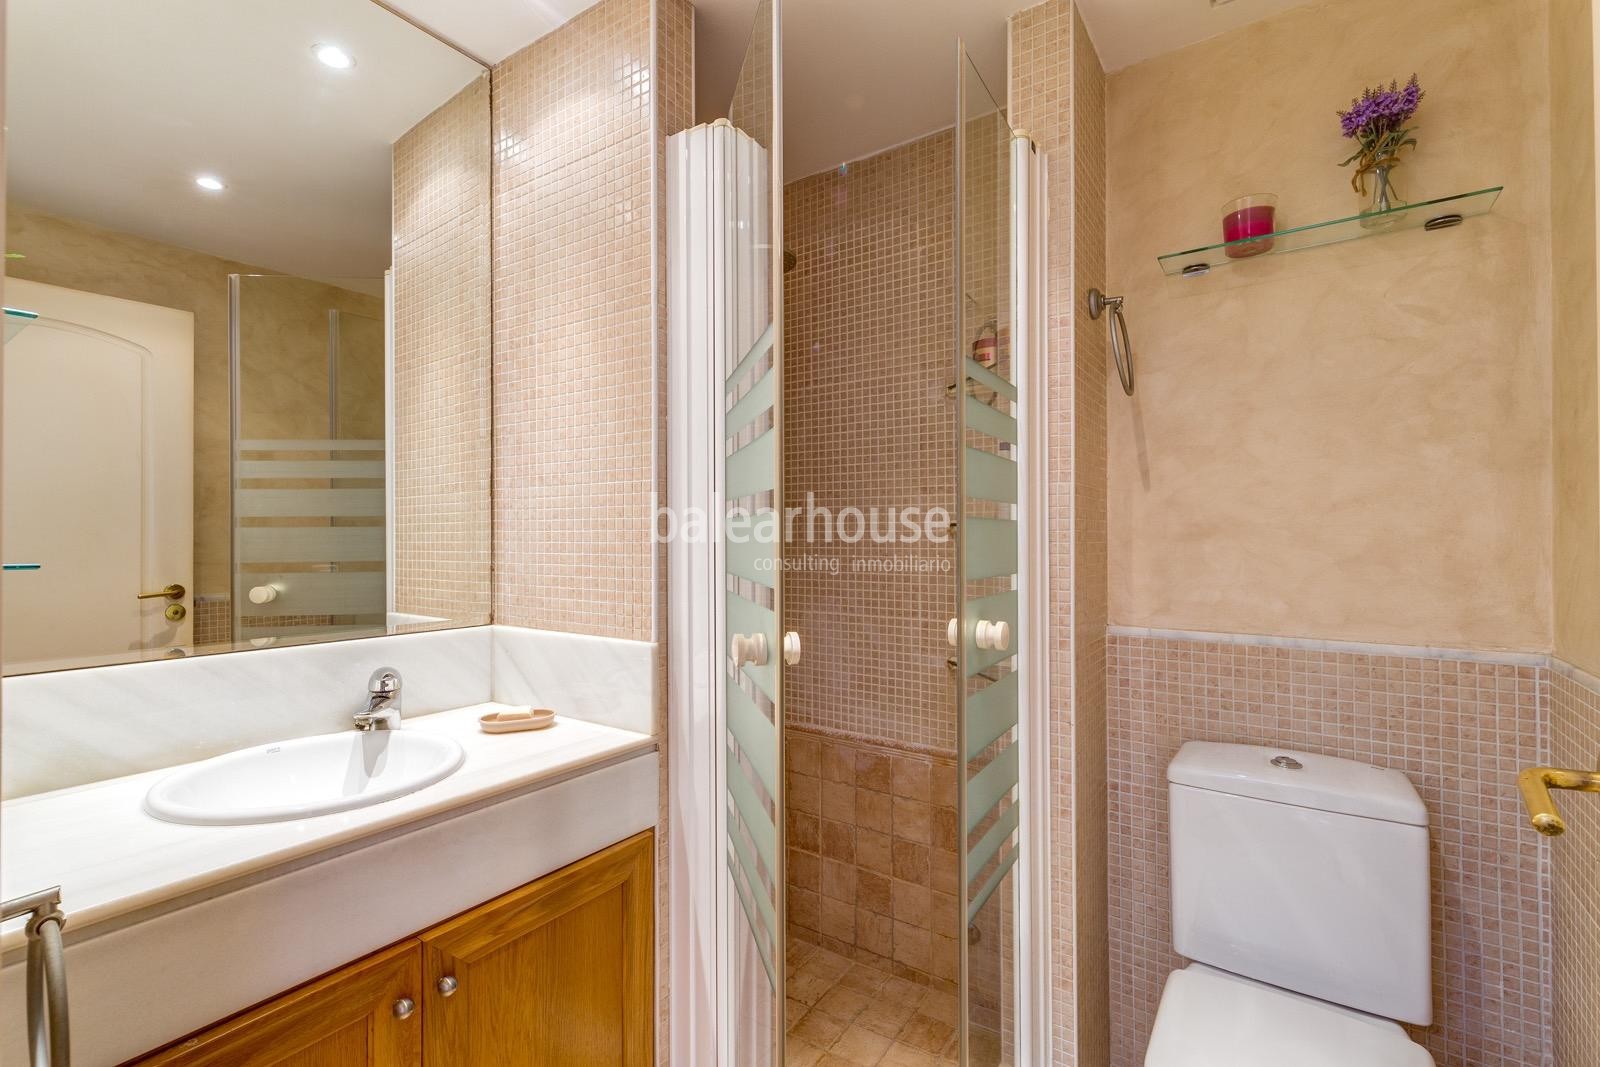 Bright and quiet semi-detached house with pool and gardens in the school area of Palma